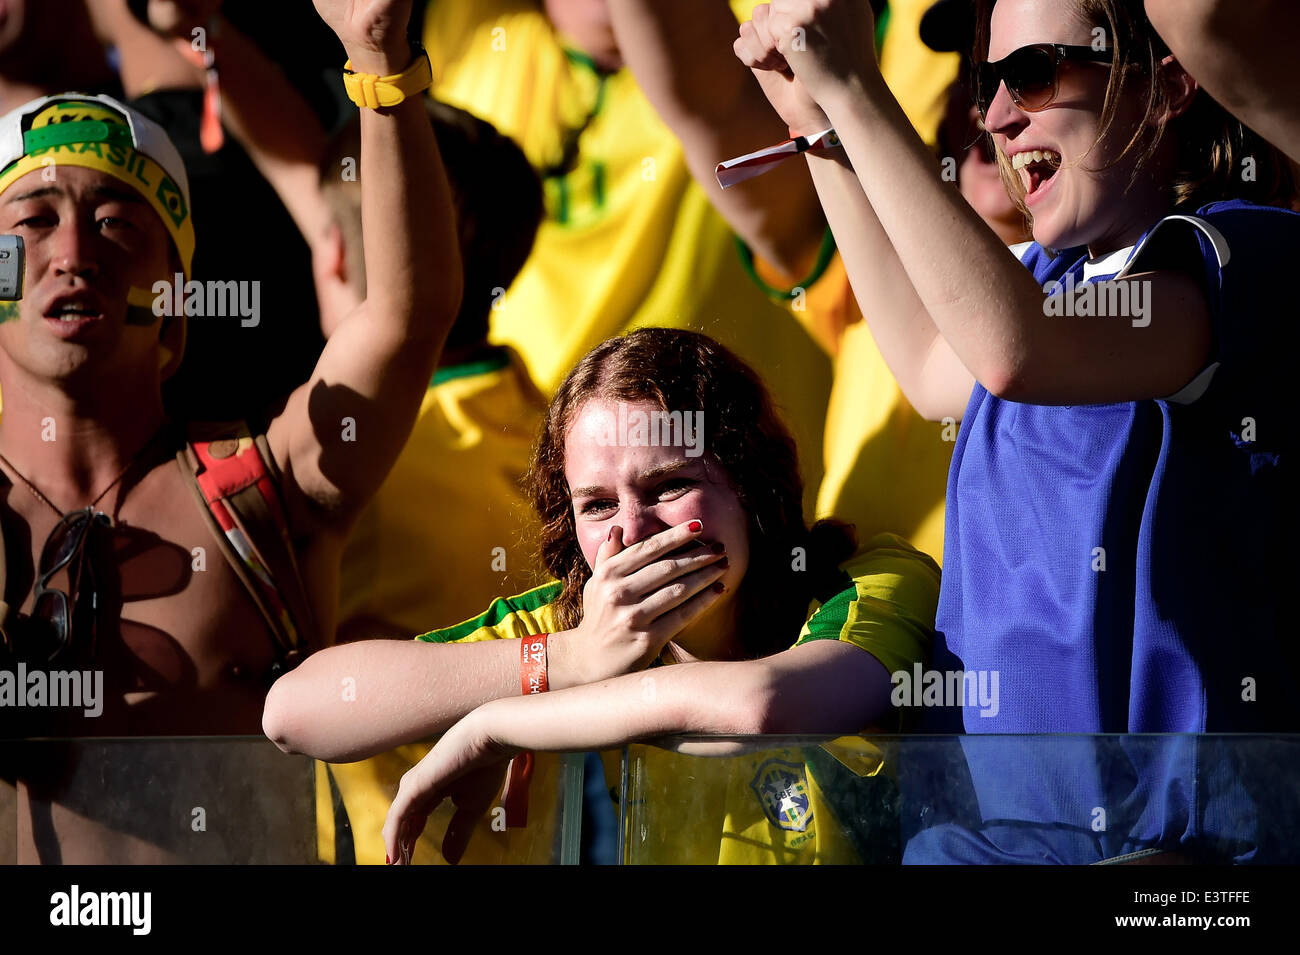 Belo Horizonte, Minas Gerais, Brazil. 28th June, 2014. Brazil wins Chile in the penalty shootouts at the Round of 16 match of the 2014 World Cup, this saturday, June 28th, in Belo Horizonte. Credit:  Gustavo Basso/NurPhoto/ZUMAPRESS.com/Alamy Live News Stock Photo